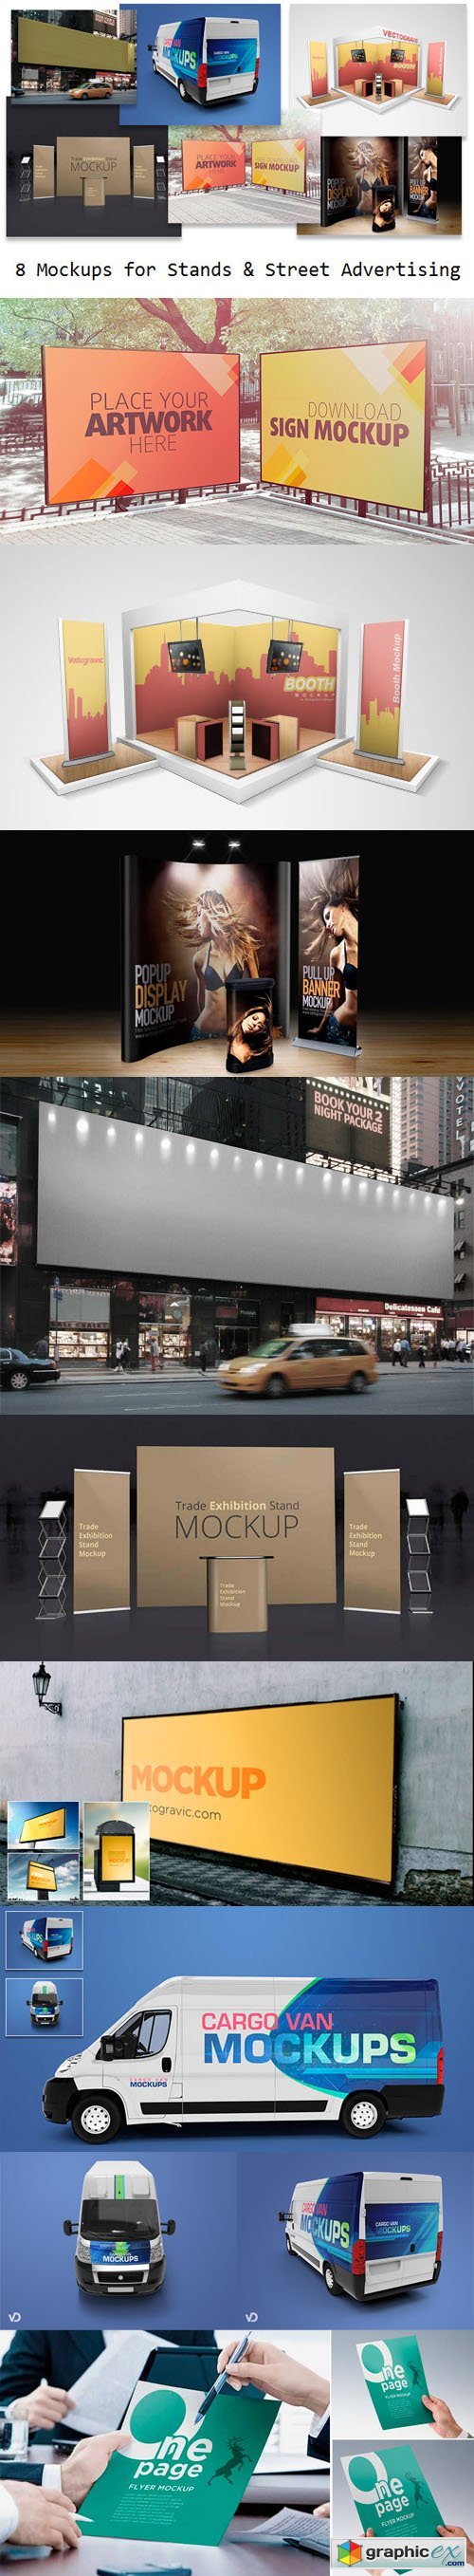 8 Mockups for Stands & Street Advertising